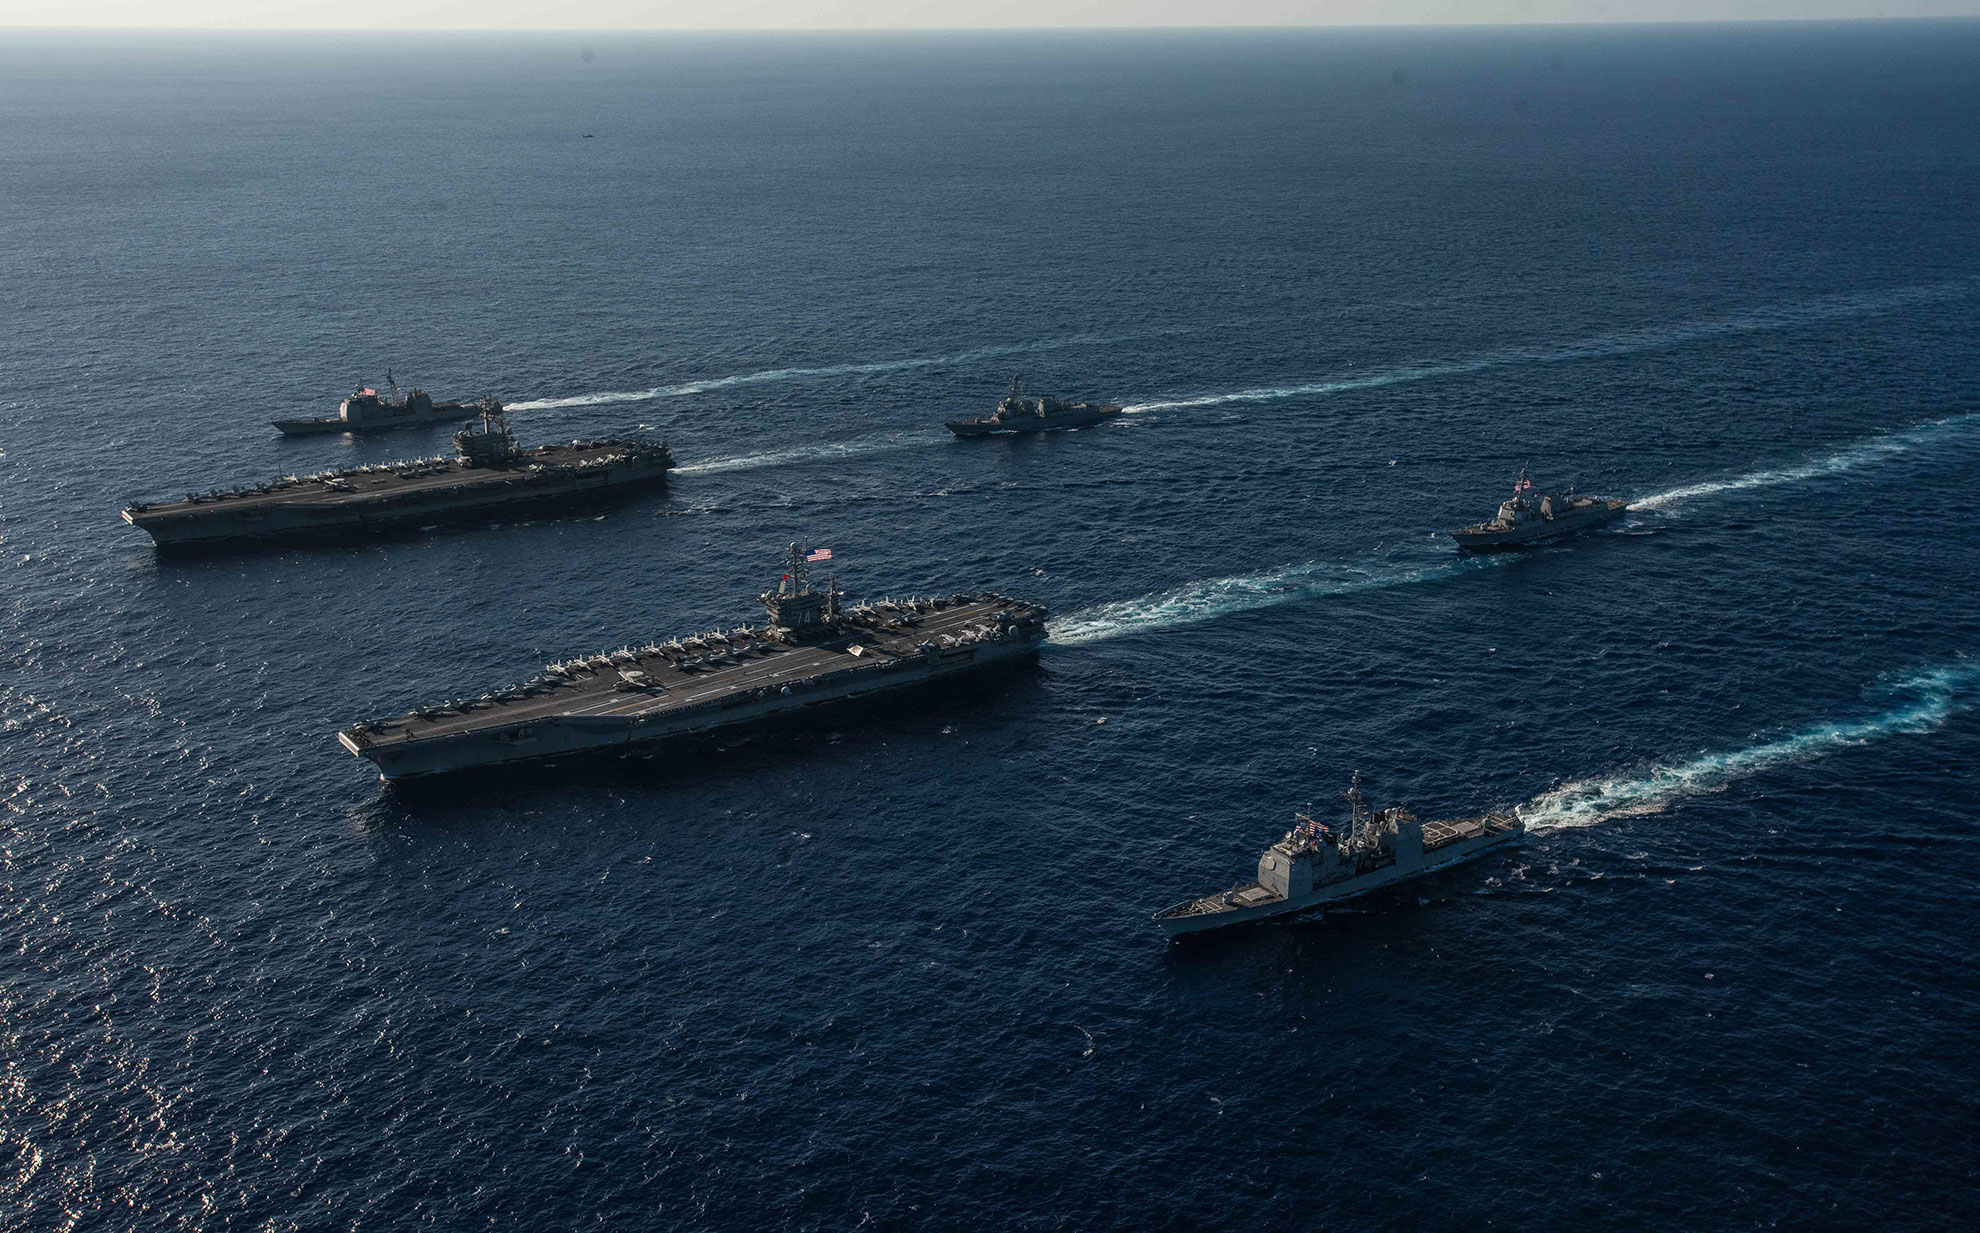 Philippine Sea (Nov. 16, 2018) Ships attached to the Ronald Reagan Carrier Strike Group and John C. Stennis Carrier Strike Group transit the Philippine Sea during dual carrier operations. Ronald Reagan and John C. Stennis are underway and conducting operations in international waters as part of a dual carrier strike force exercise. The U.S. Navy has patrolled the Indo-Pacific region routinely for more than 70 years promoting regional security, stability and prosperity -- U.S. Navy photo by MCS2 Kaila V. Peters. -